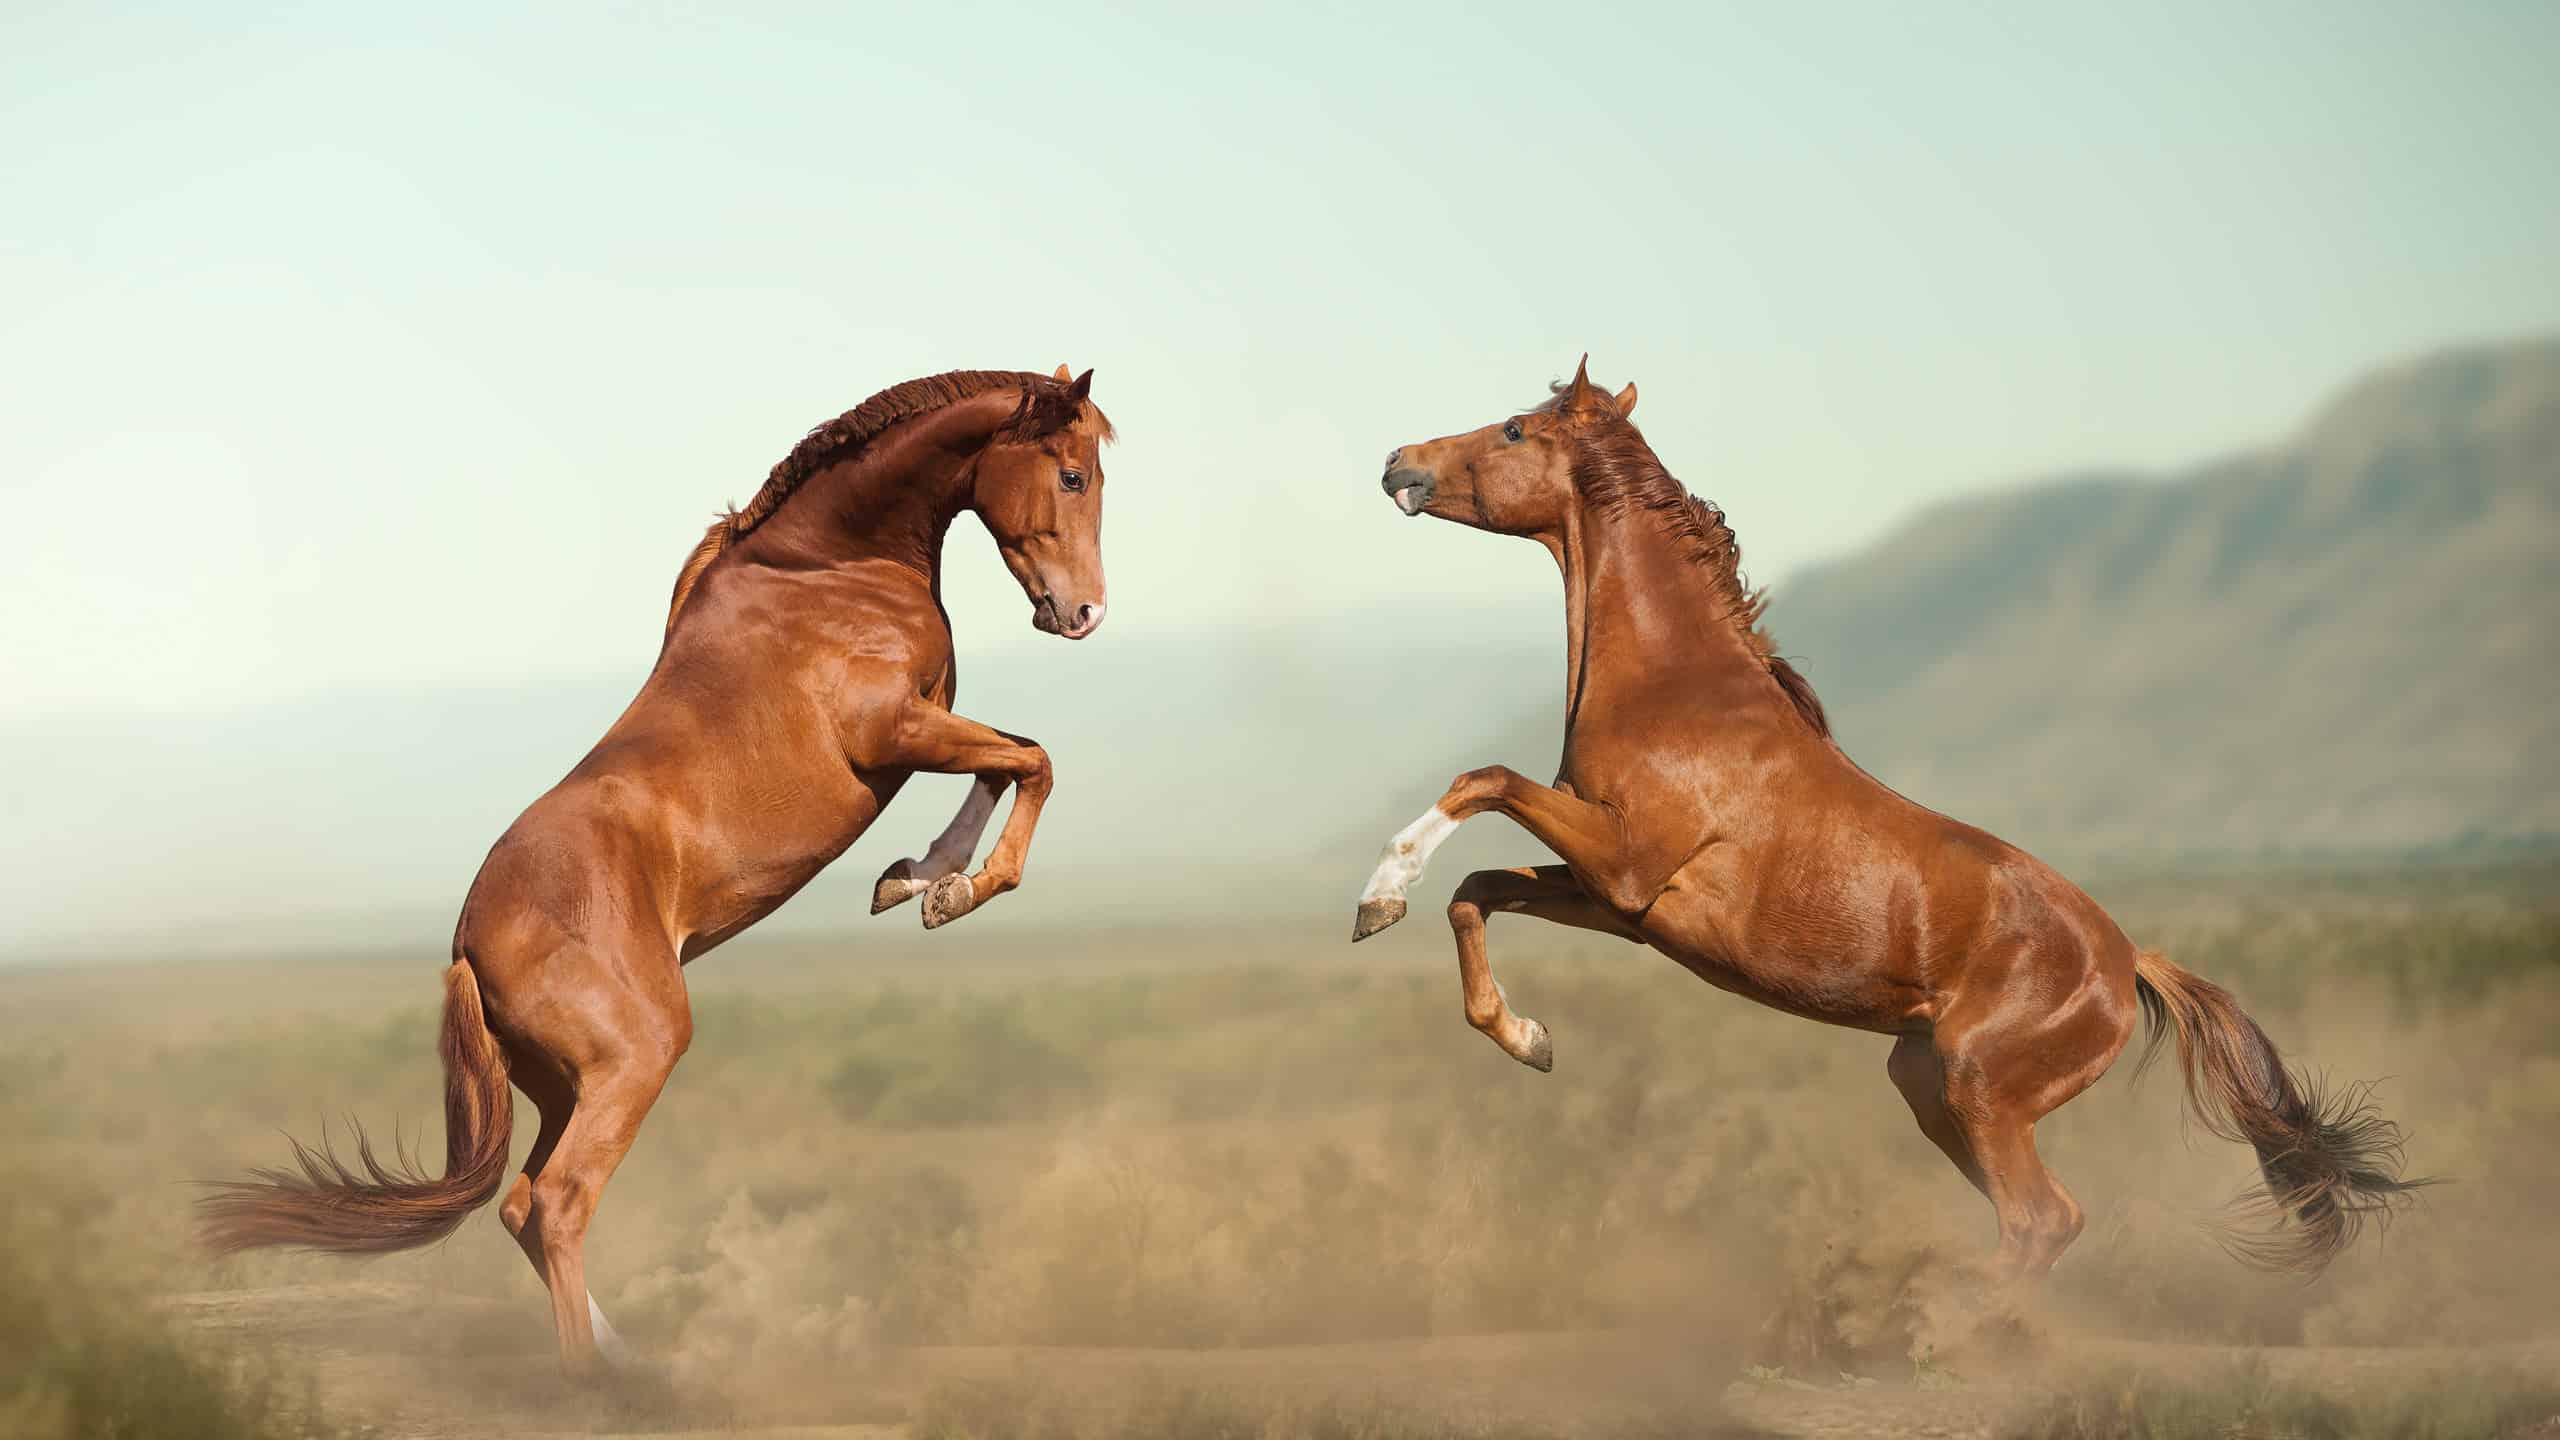 Two young stallions jump toward each other, kicking dirt into the air